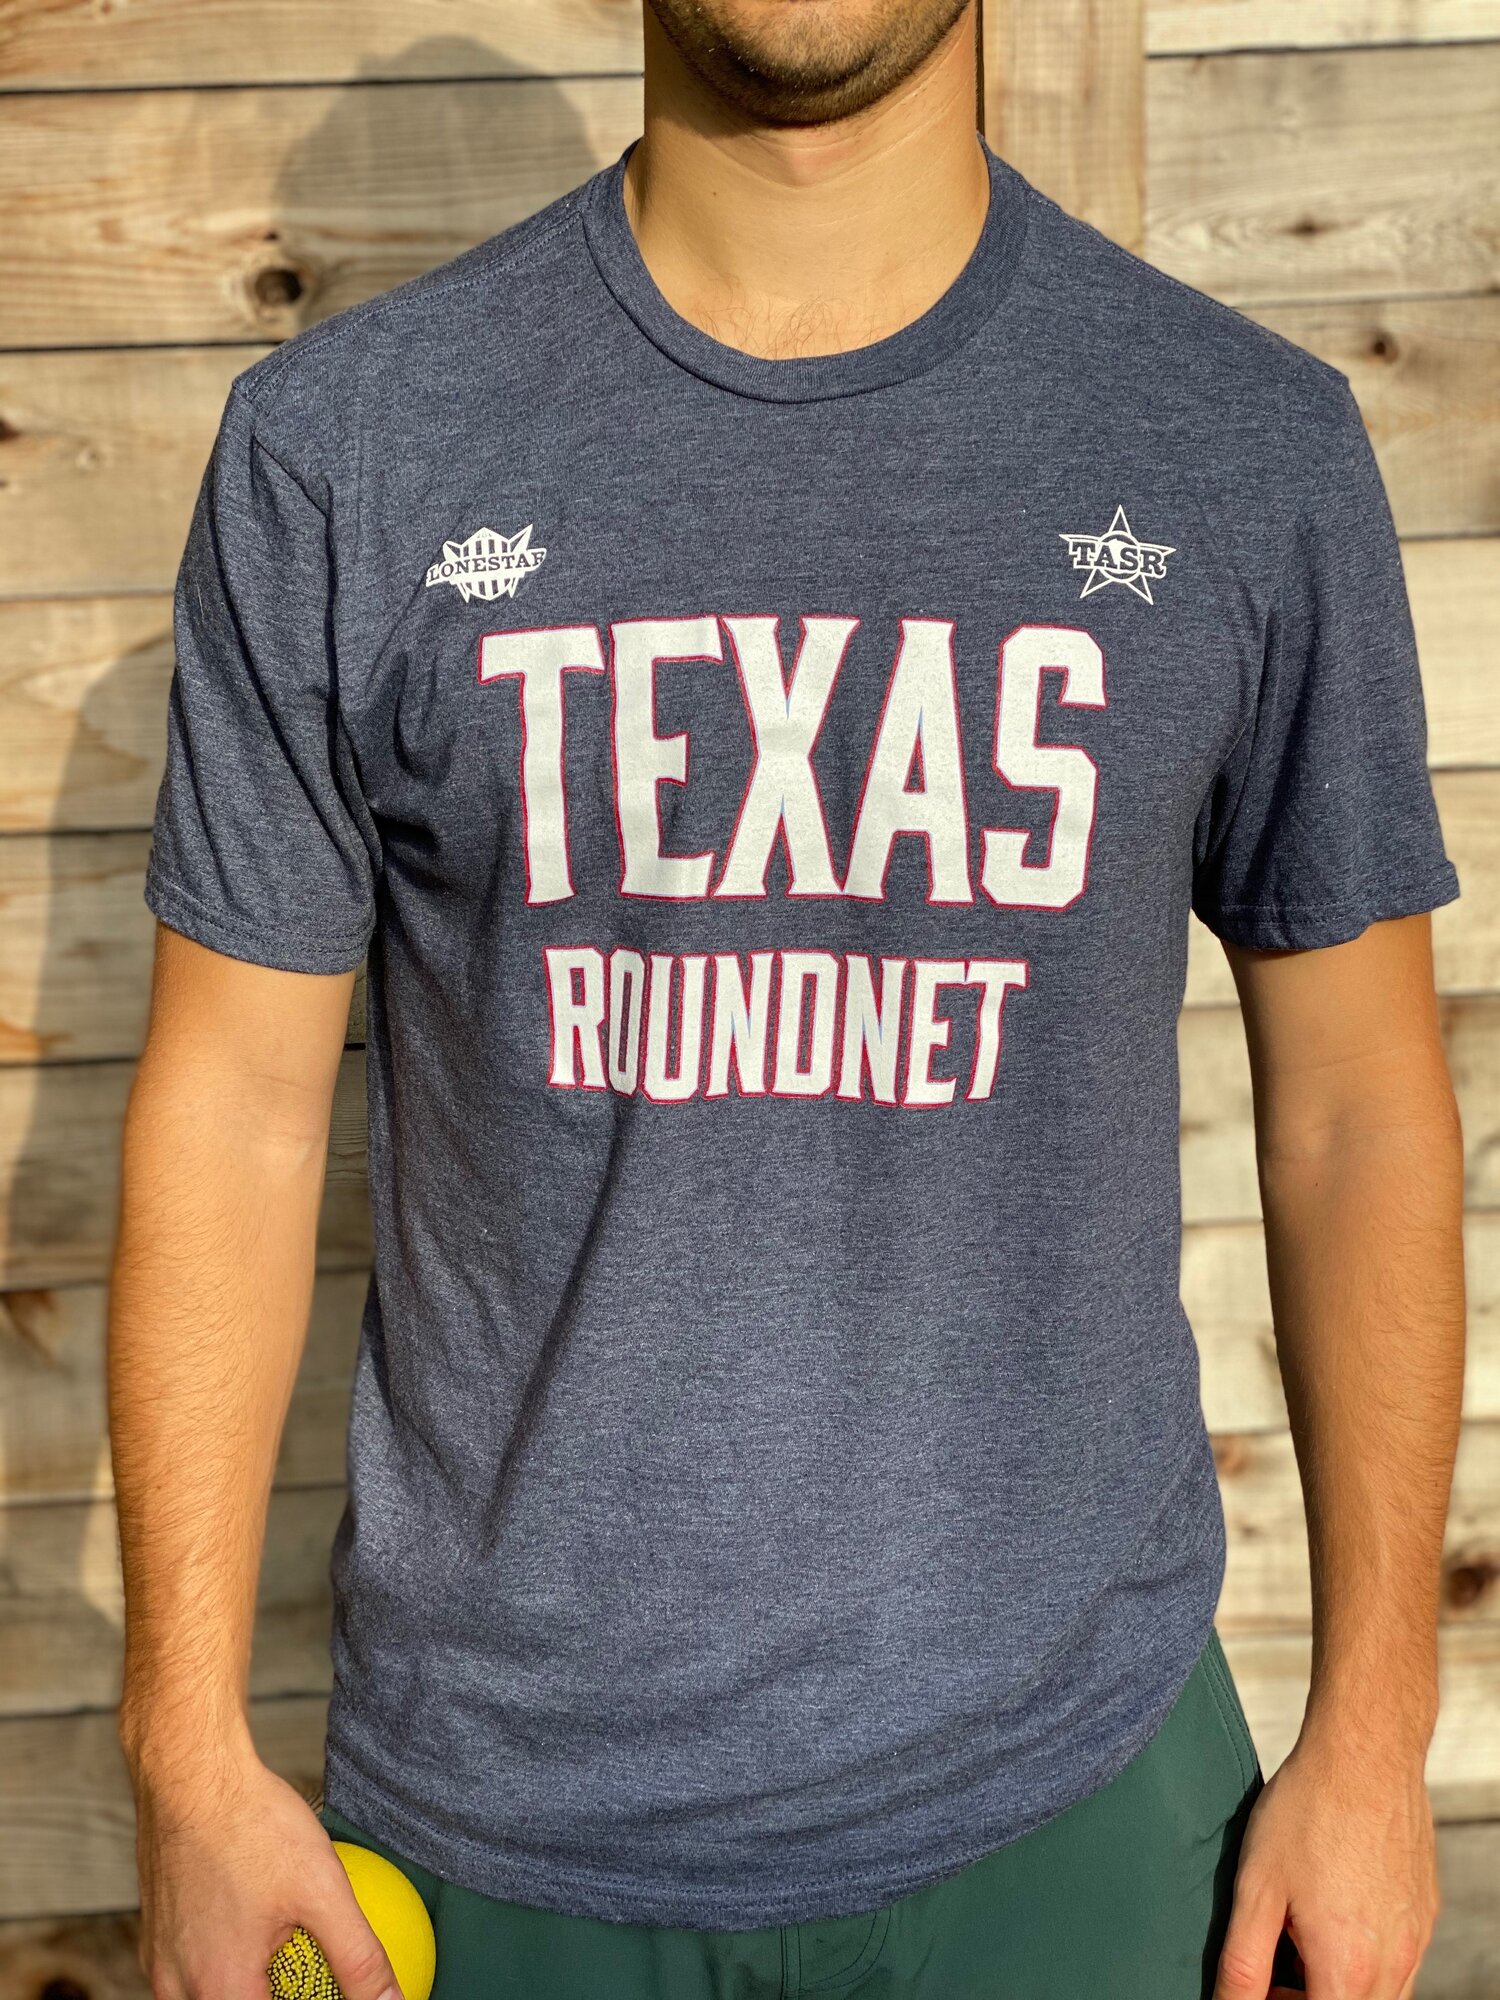 Texas Top 100 — Texas Association for the Sport of Roundnet